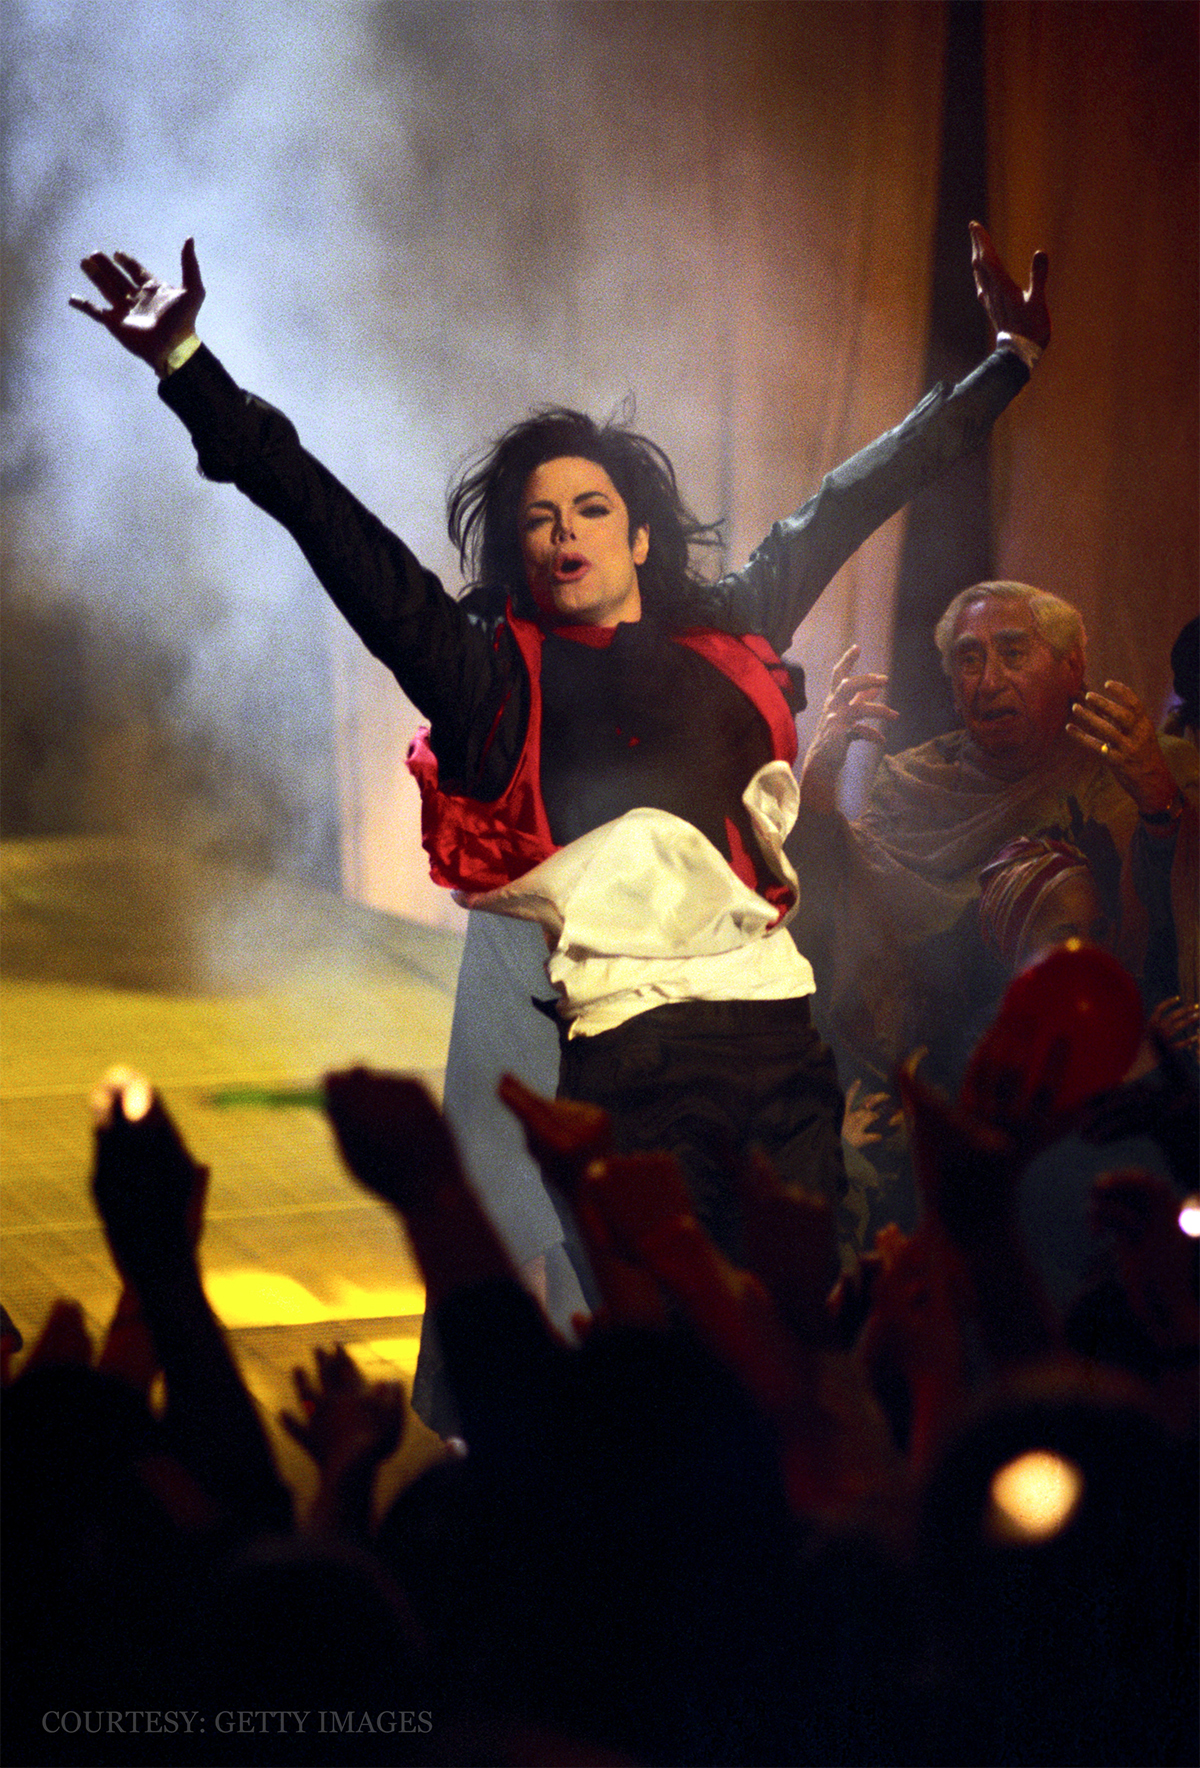 Michael Jackson performs Earth Song at BRIT Awards in London's Earls Court February 19, 1996